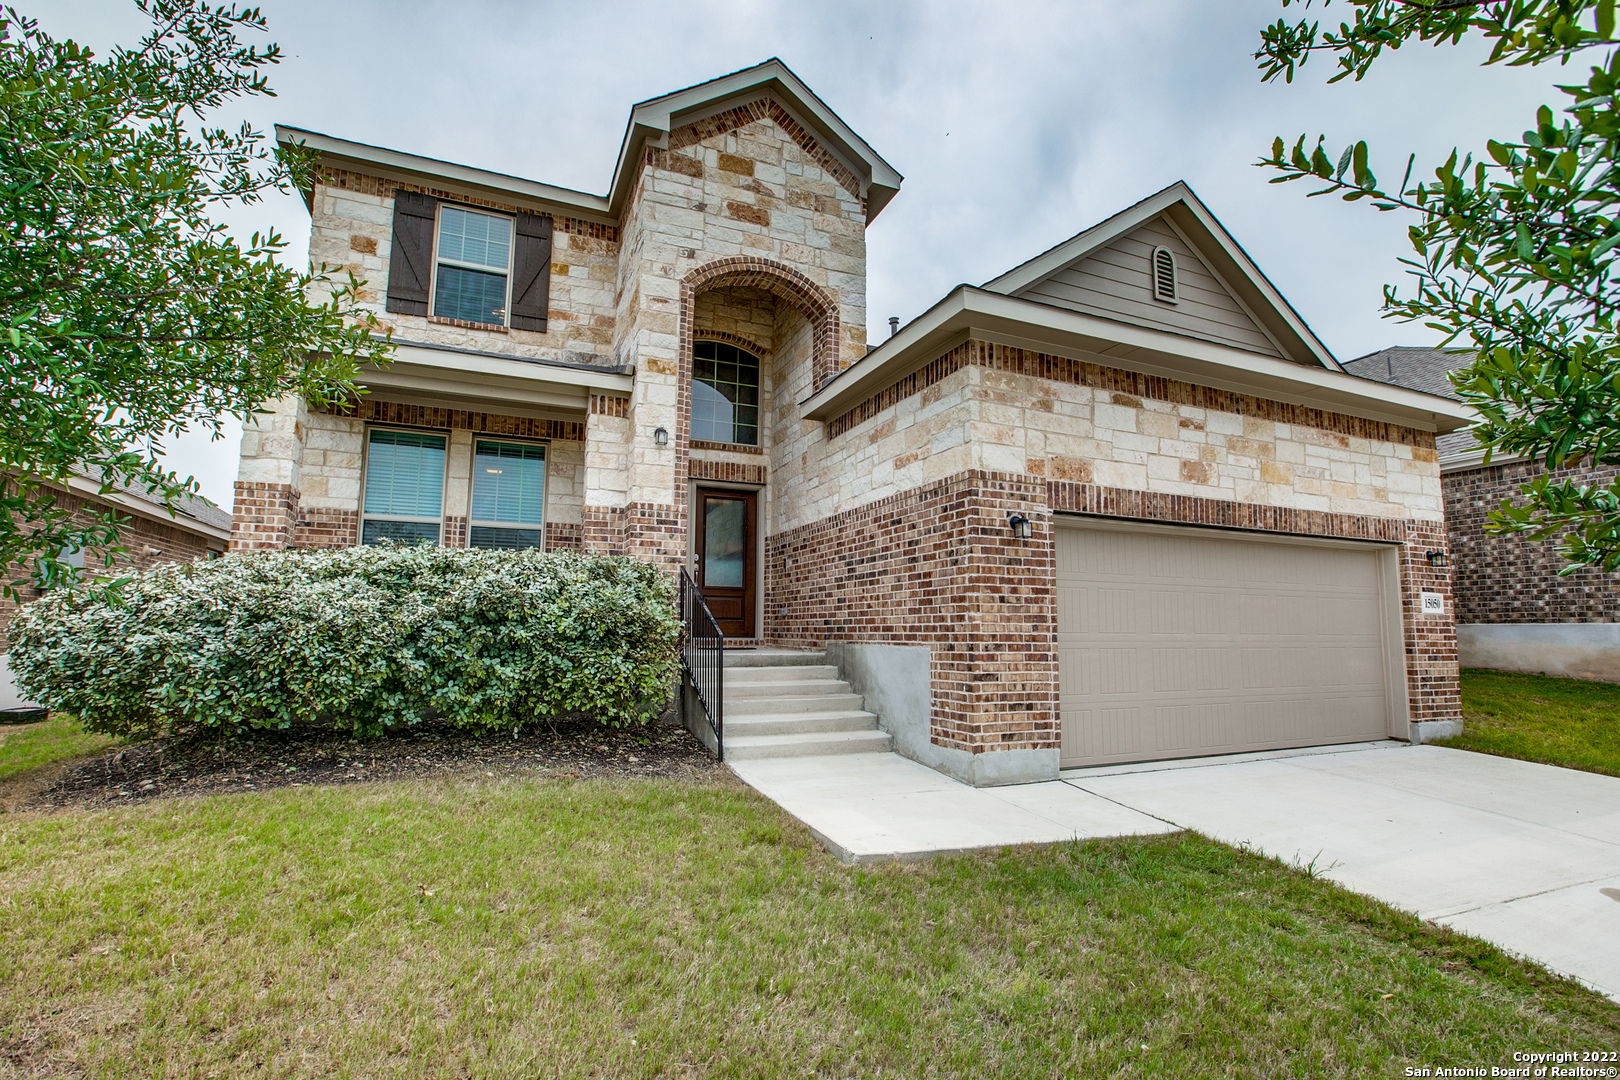 *Showings will begin on 5/27/2022.* Welcome to this absolutely stunning and well-maintained home located in the Potranco Run subdivision. This home was built in 2018 at just under 2700 square feet and you're less than 25 mins from Lackland AFB and NSA, and close to shopping, medical, and central to almost anything you need. Key features are 4 spacious bedrooms and 3 1/2 bathrooms. You can truly enjoy your large, downstairs master suite with it's great closet space and luxurious master bathroom with separate tub/shower and double vanity. The secondary bedroom sizes are perfect, as well, and all are located upstairs along with one of the largest game room/loft areas you can get anywhere! The kitchen with separate dining room (used as an office) and breakfast nook rounds out this wonderful, open floor plan. It has a great fenced-in backyard with a covered patio that is ready for your next cookout with friends or family. This home is a must see, so add it to your list and see it before it's gone!